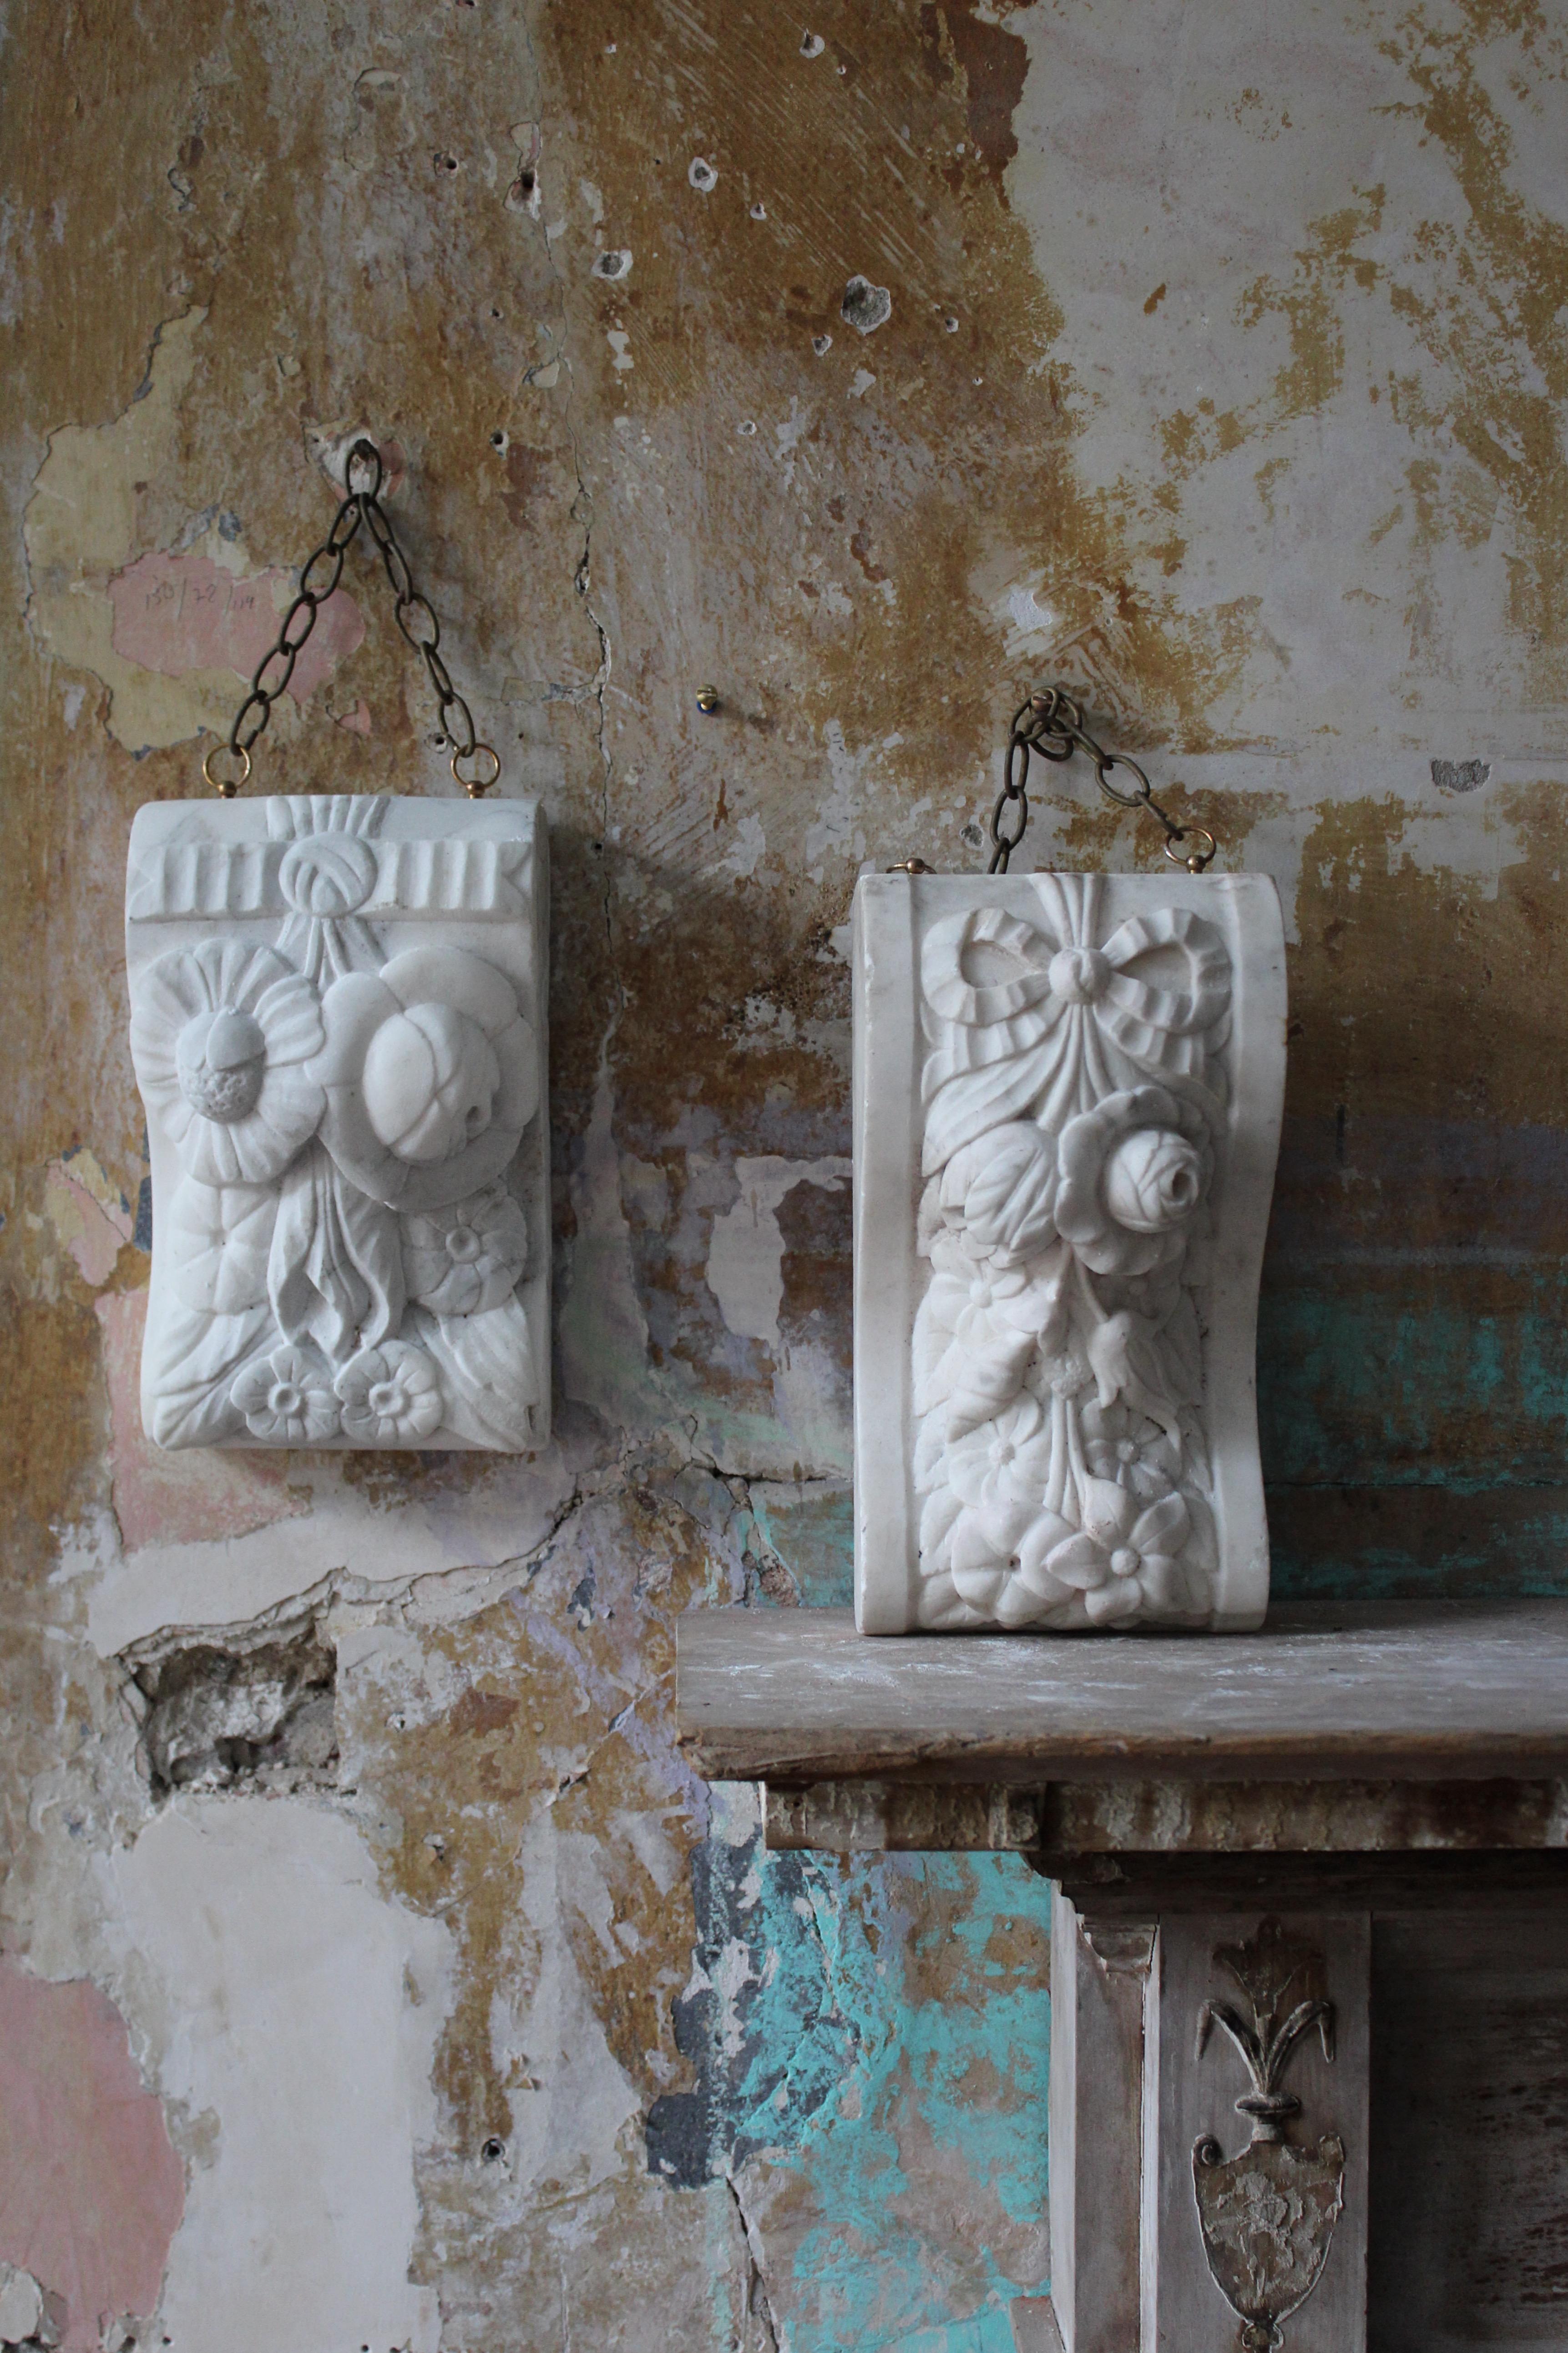 late 19th century pair of hand carved marble corbels both with similar organic following decorations and previously part of larger interior architectural feature or fireplace

The sections are extremely well carved, crisp and have a good decorative